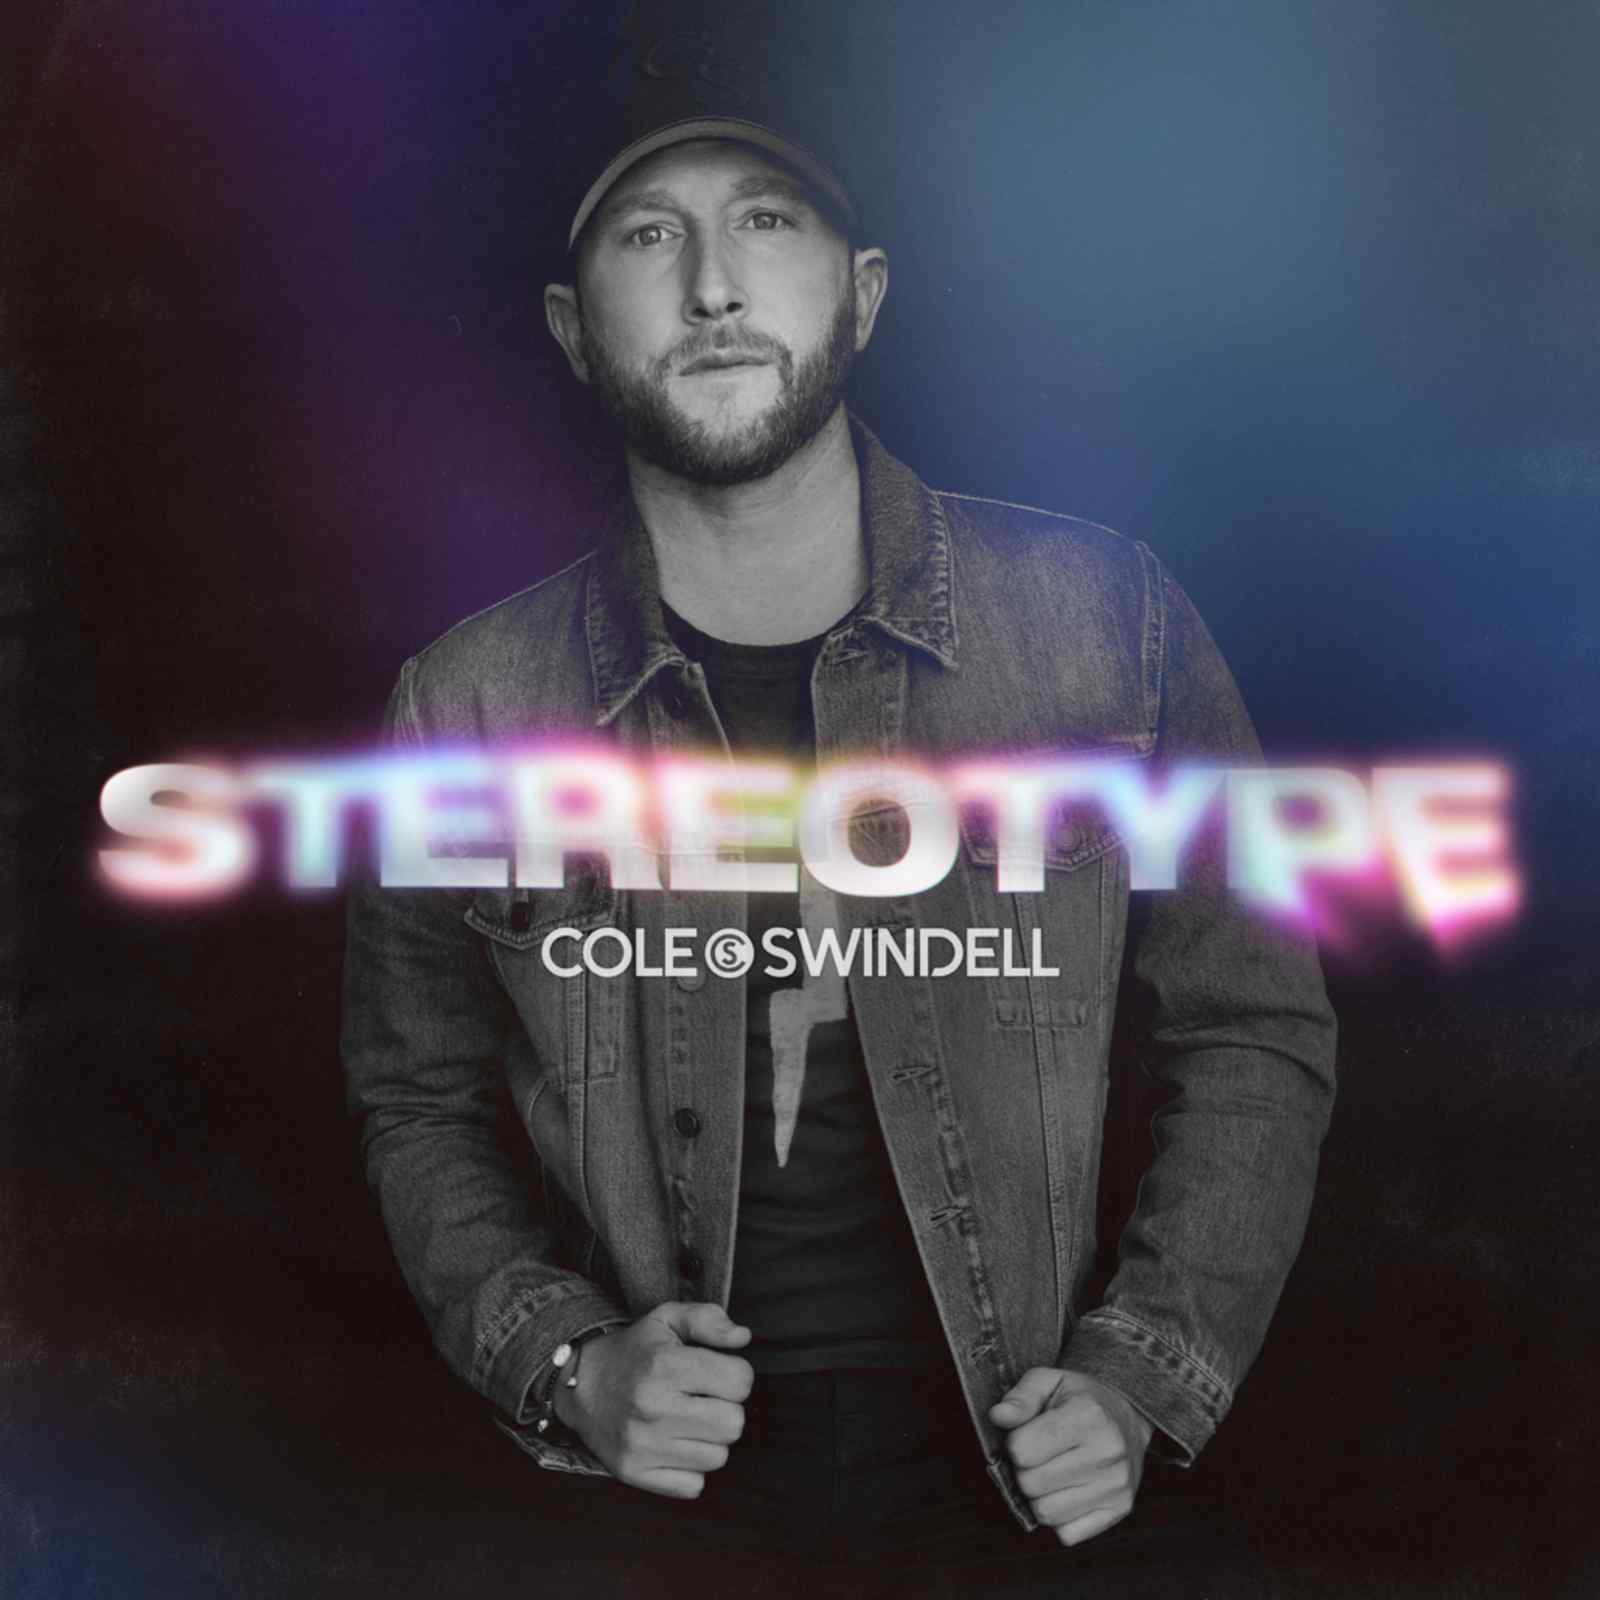 Stereotype by Cole Swindell